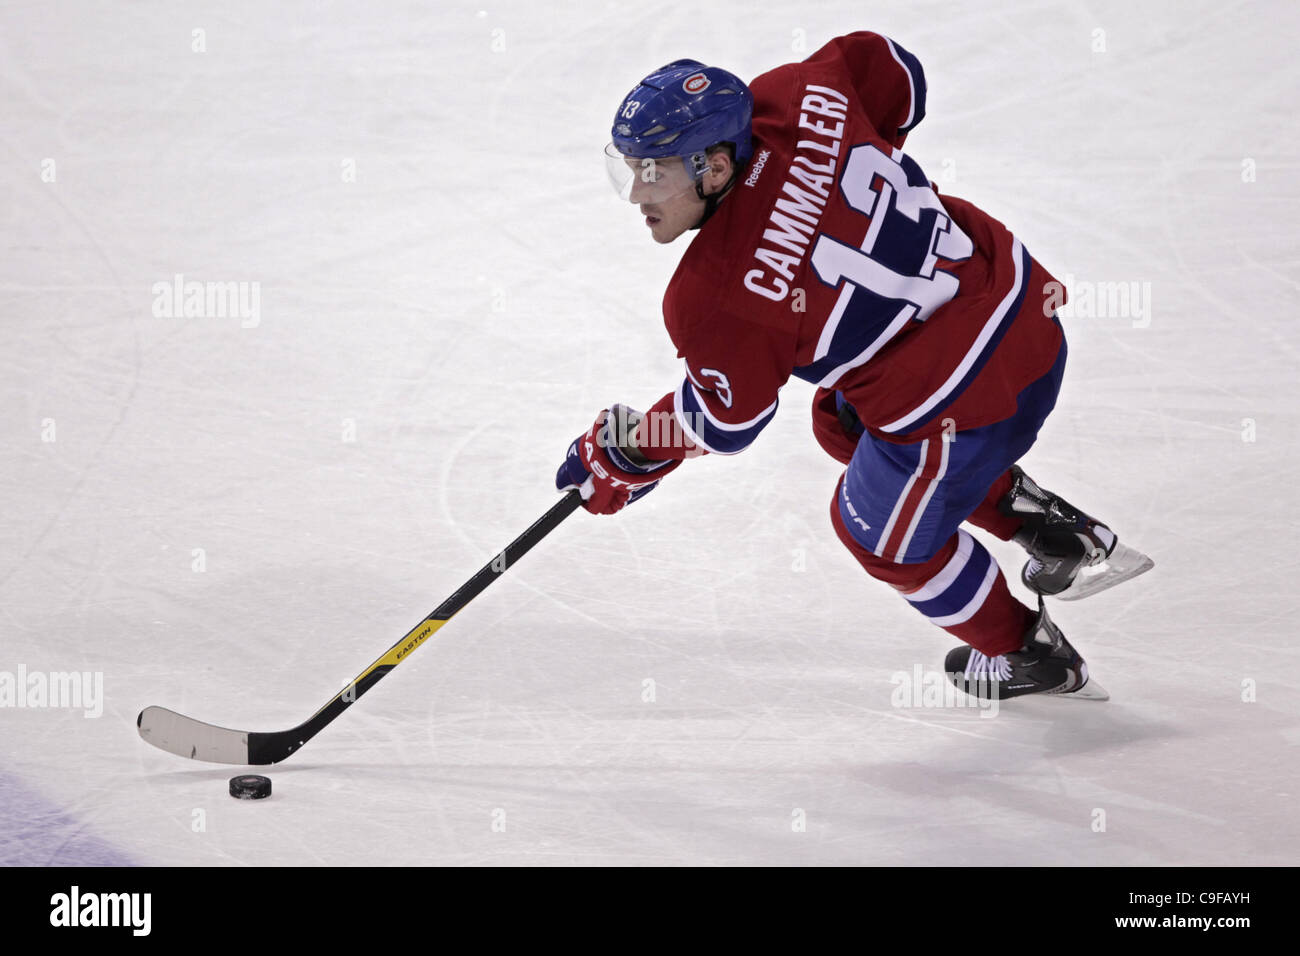 Dec. 13, 2011 - Montreal, Quebec, Canada - Montreal Canadiens forward Michael Cammalleri(13) carries the puck in third period action during the Montreal Canadiens' game against the New-York Islanders at Bell Center. Montreal won 5-3. (Credit Image: © Phillippe Champoux/Southcreek/ZUMAPRESS.com) Stock Photo